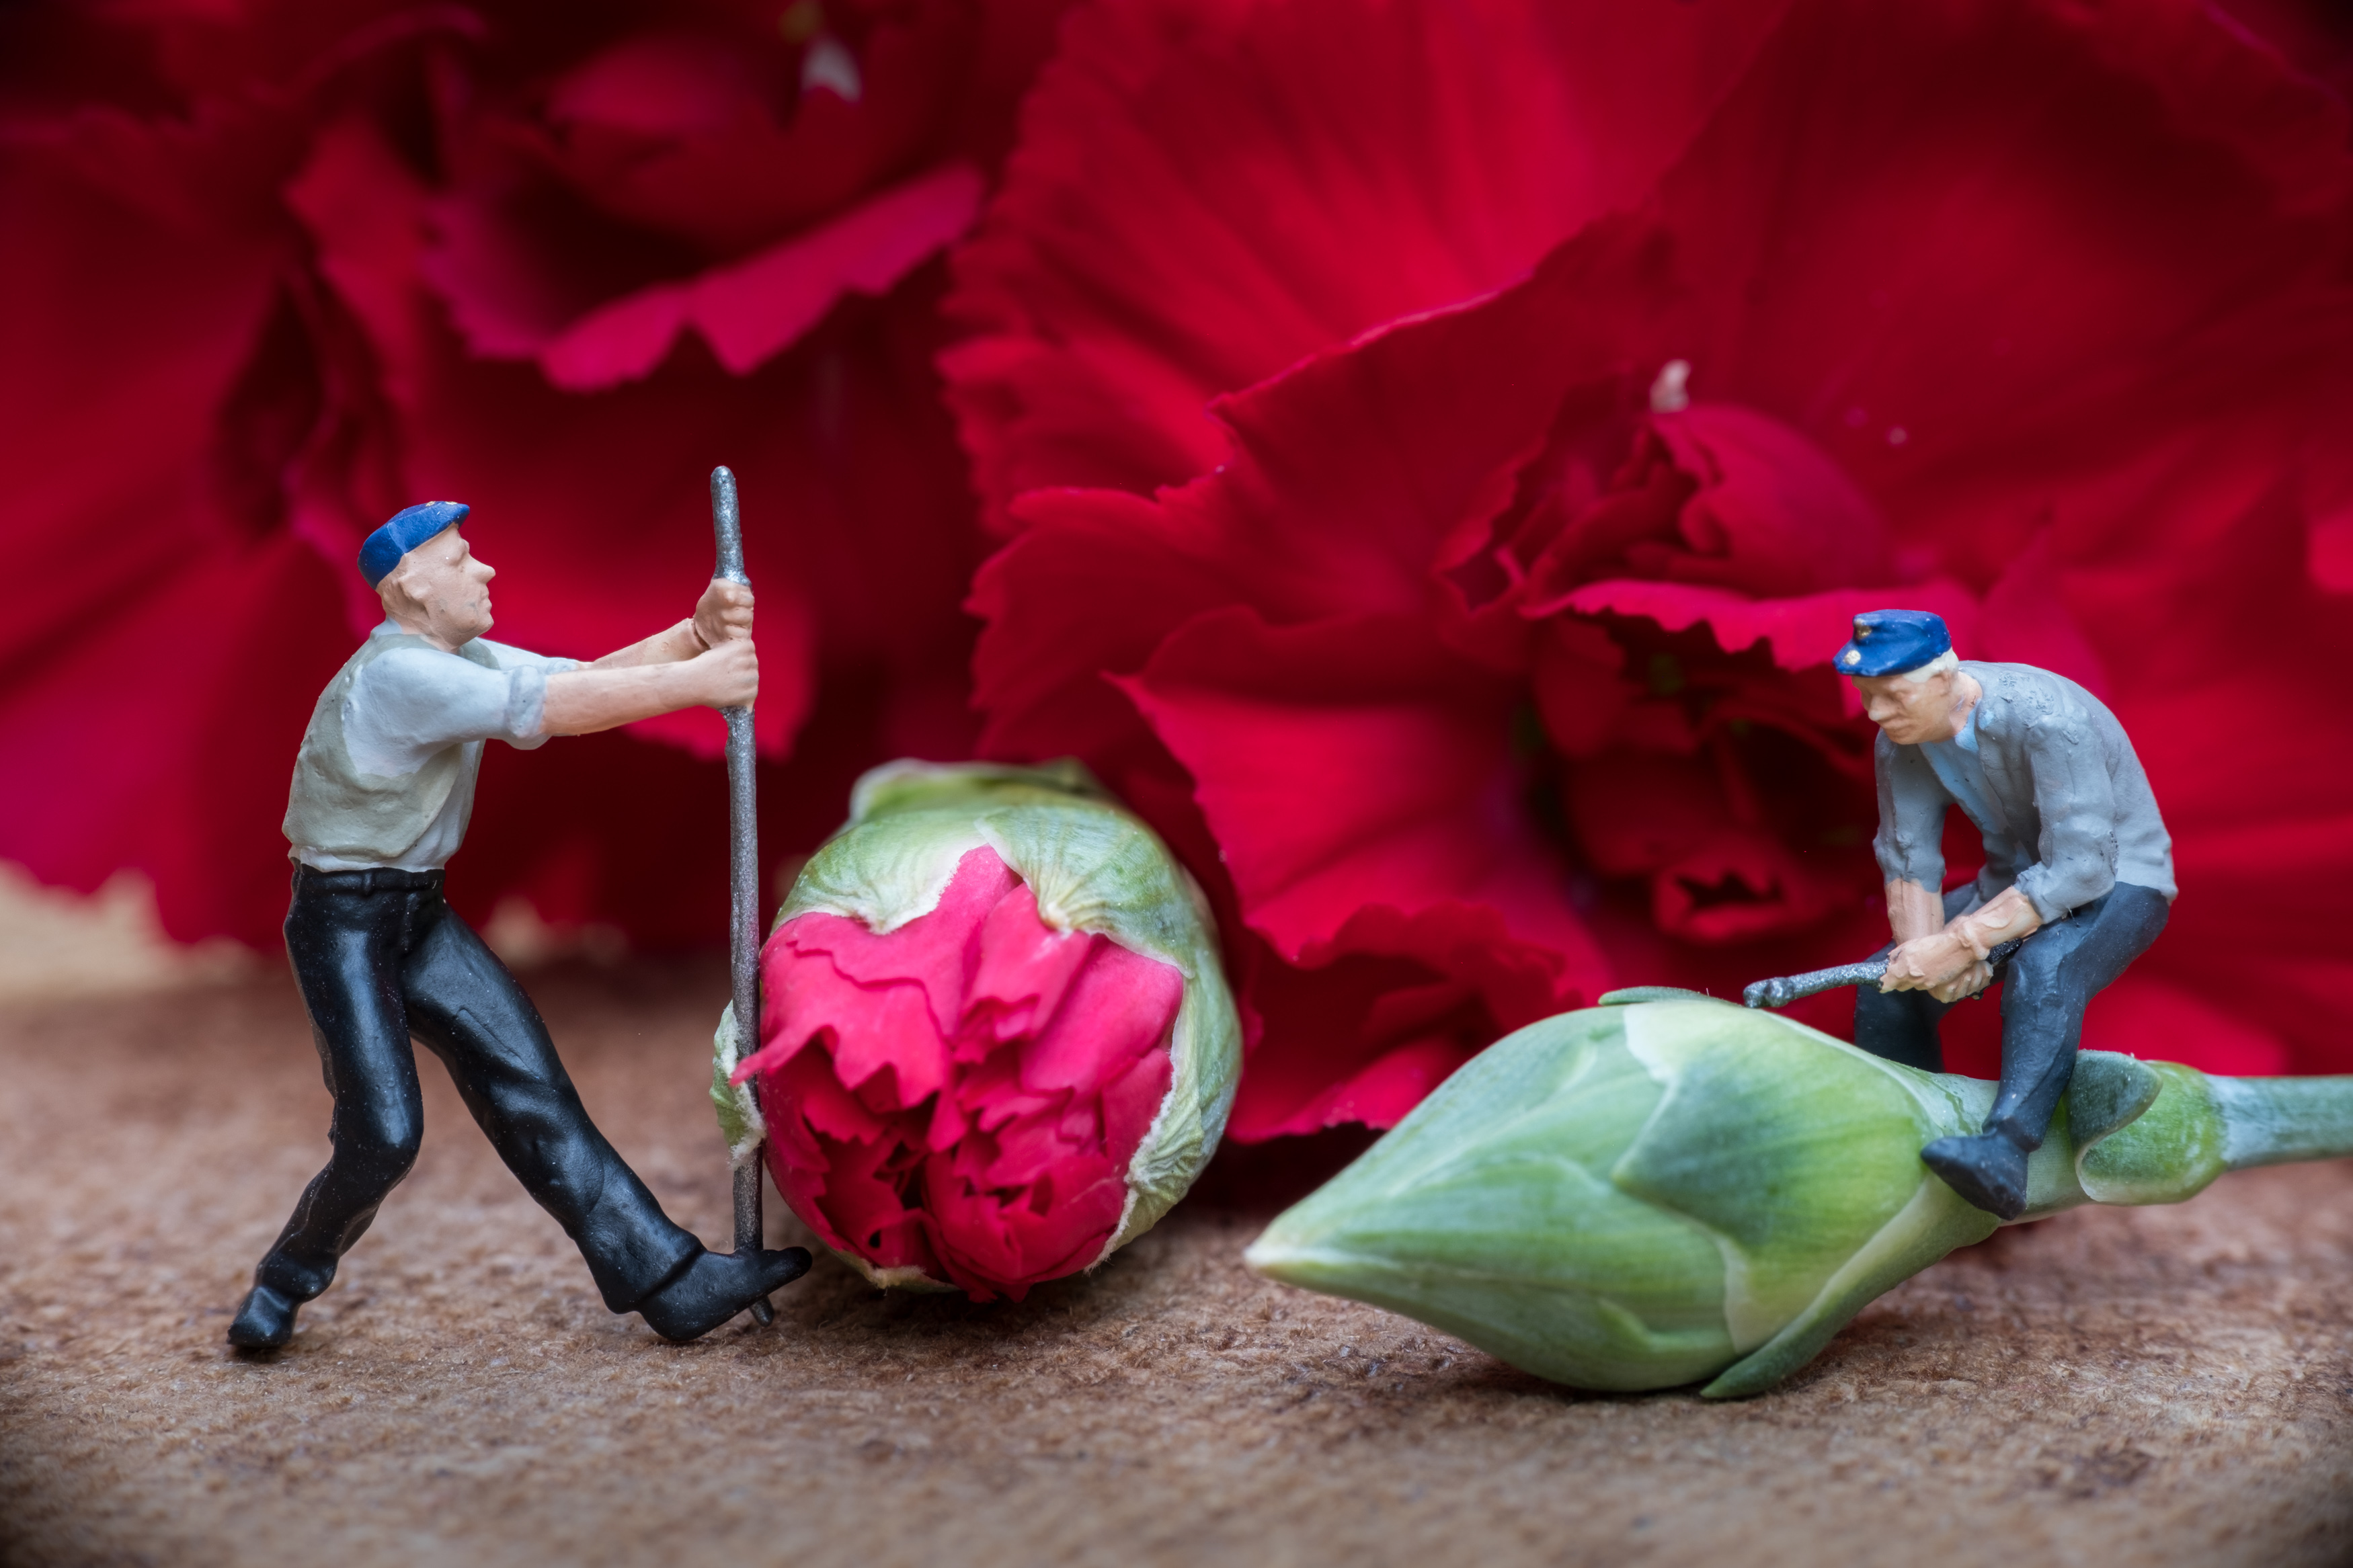 Photo of miniature figures “opening” carnation flowers